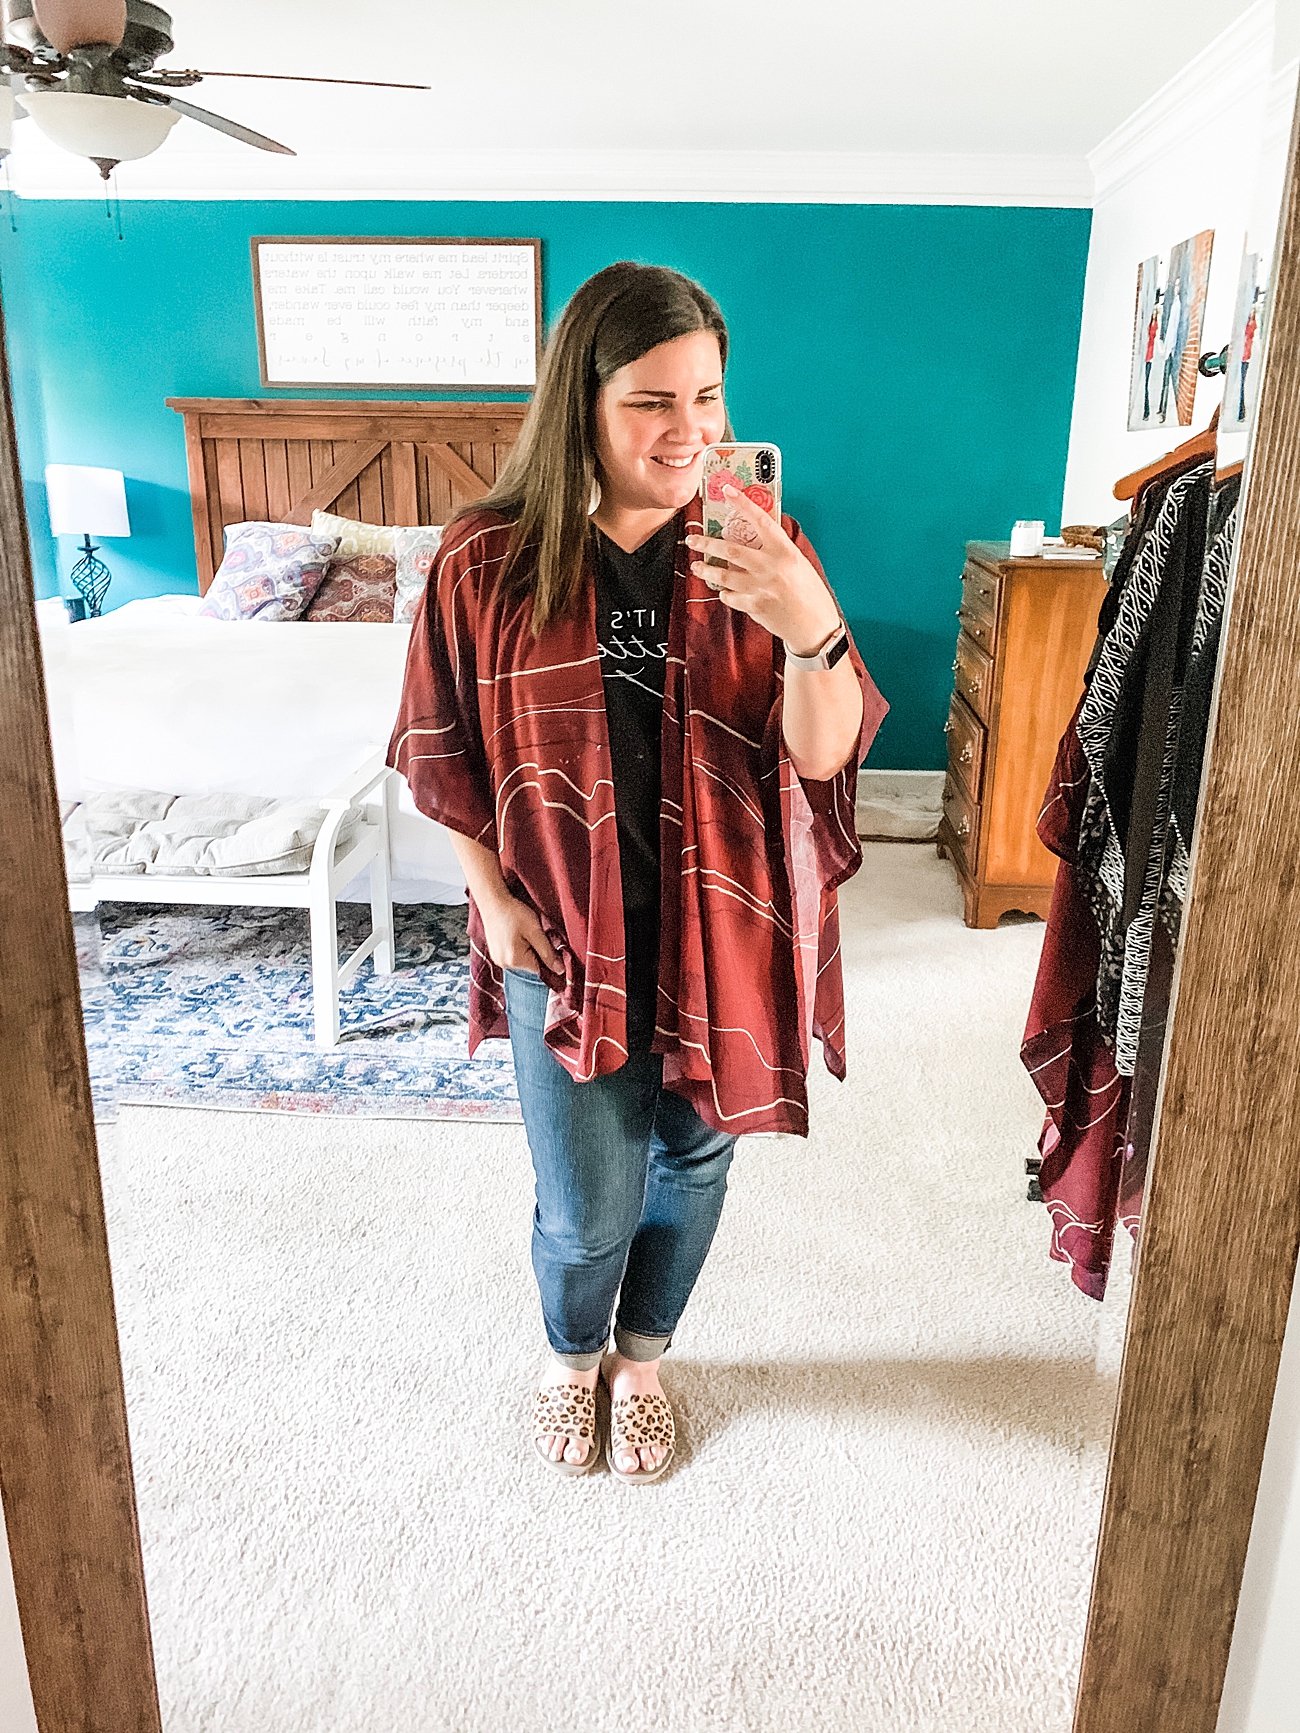 Sseko Designs Fall 2019 Sojourner Collection | Review + Try-On | Fair Trade Fashion #fairtradestyle #ethicalfashion http://www.ssekodesigns.com/mollystillman (17)